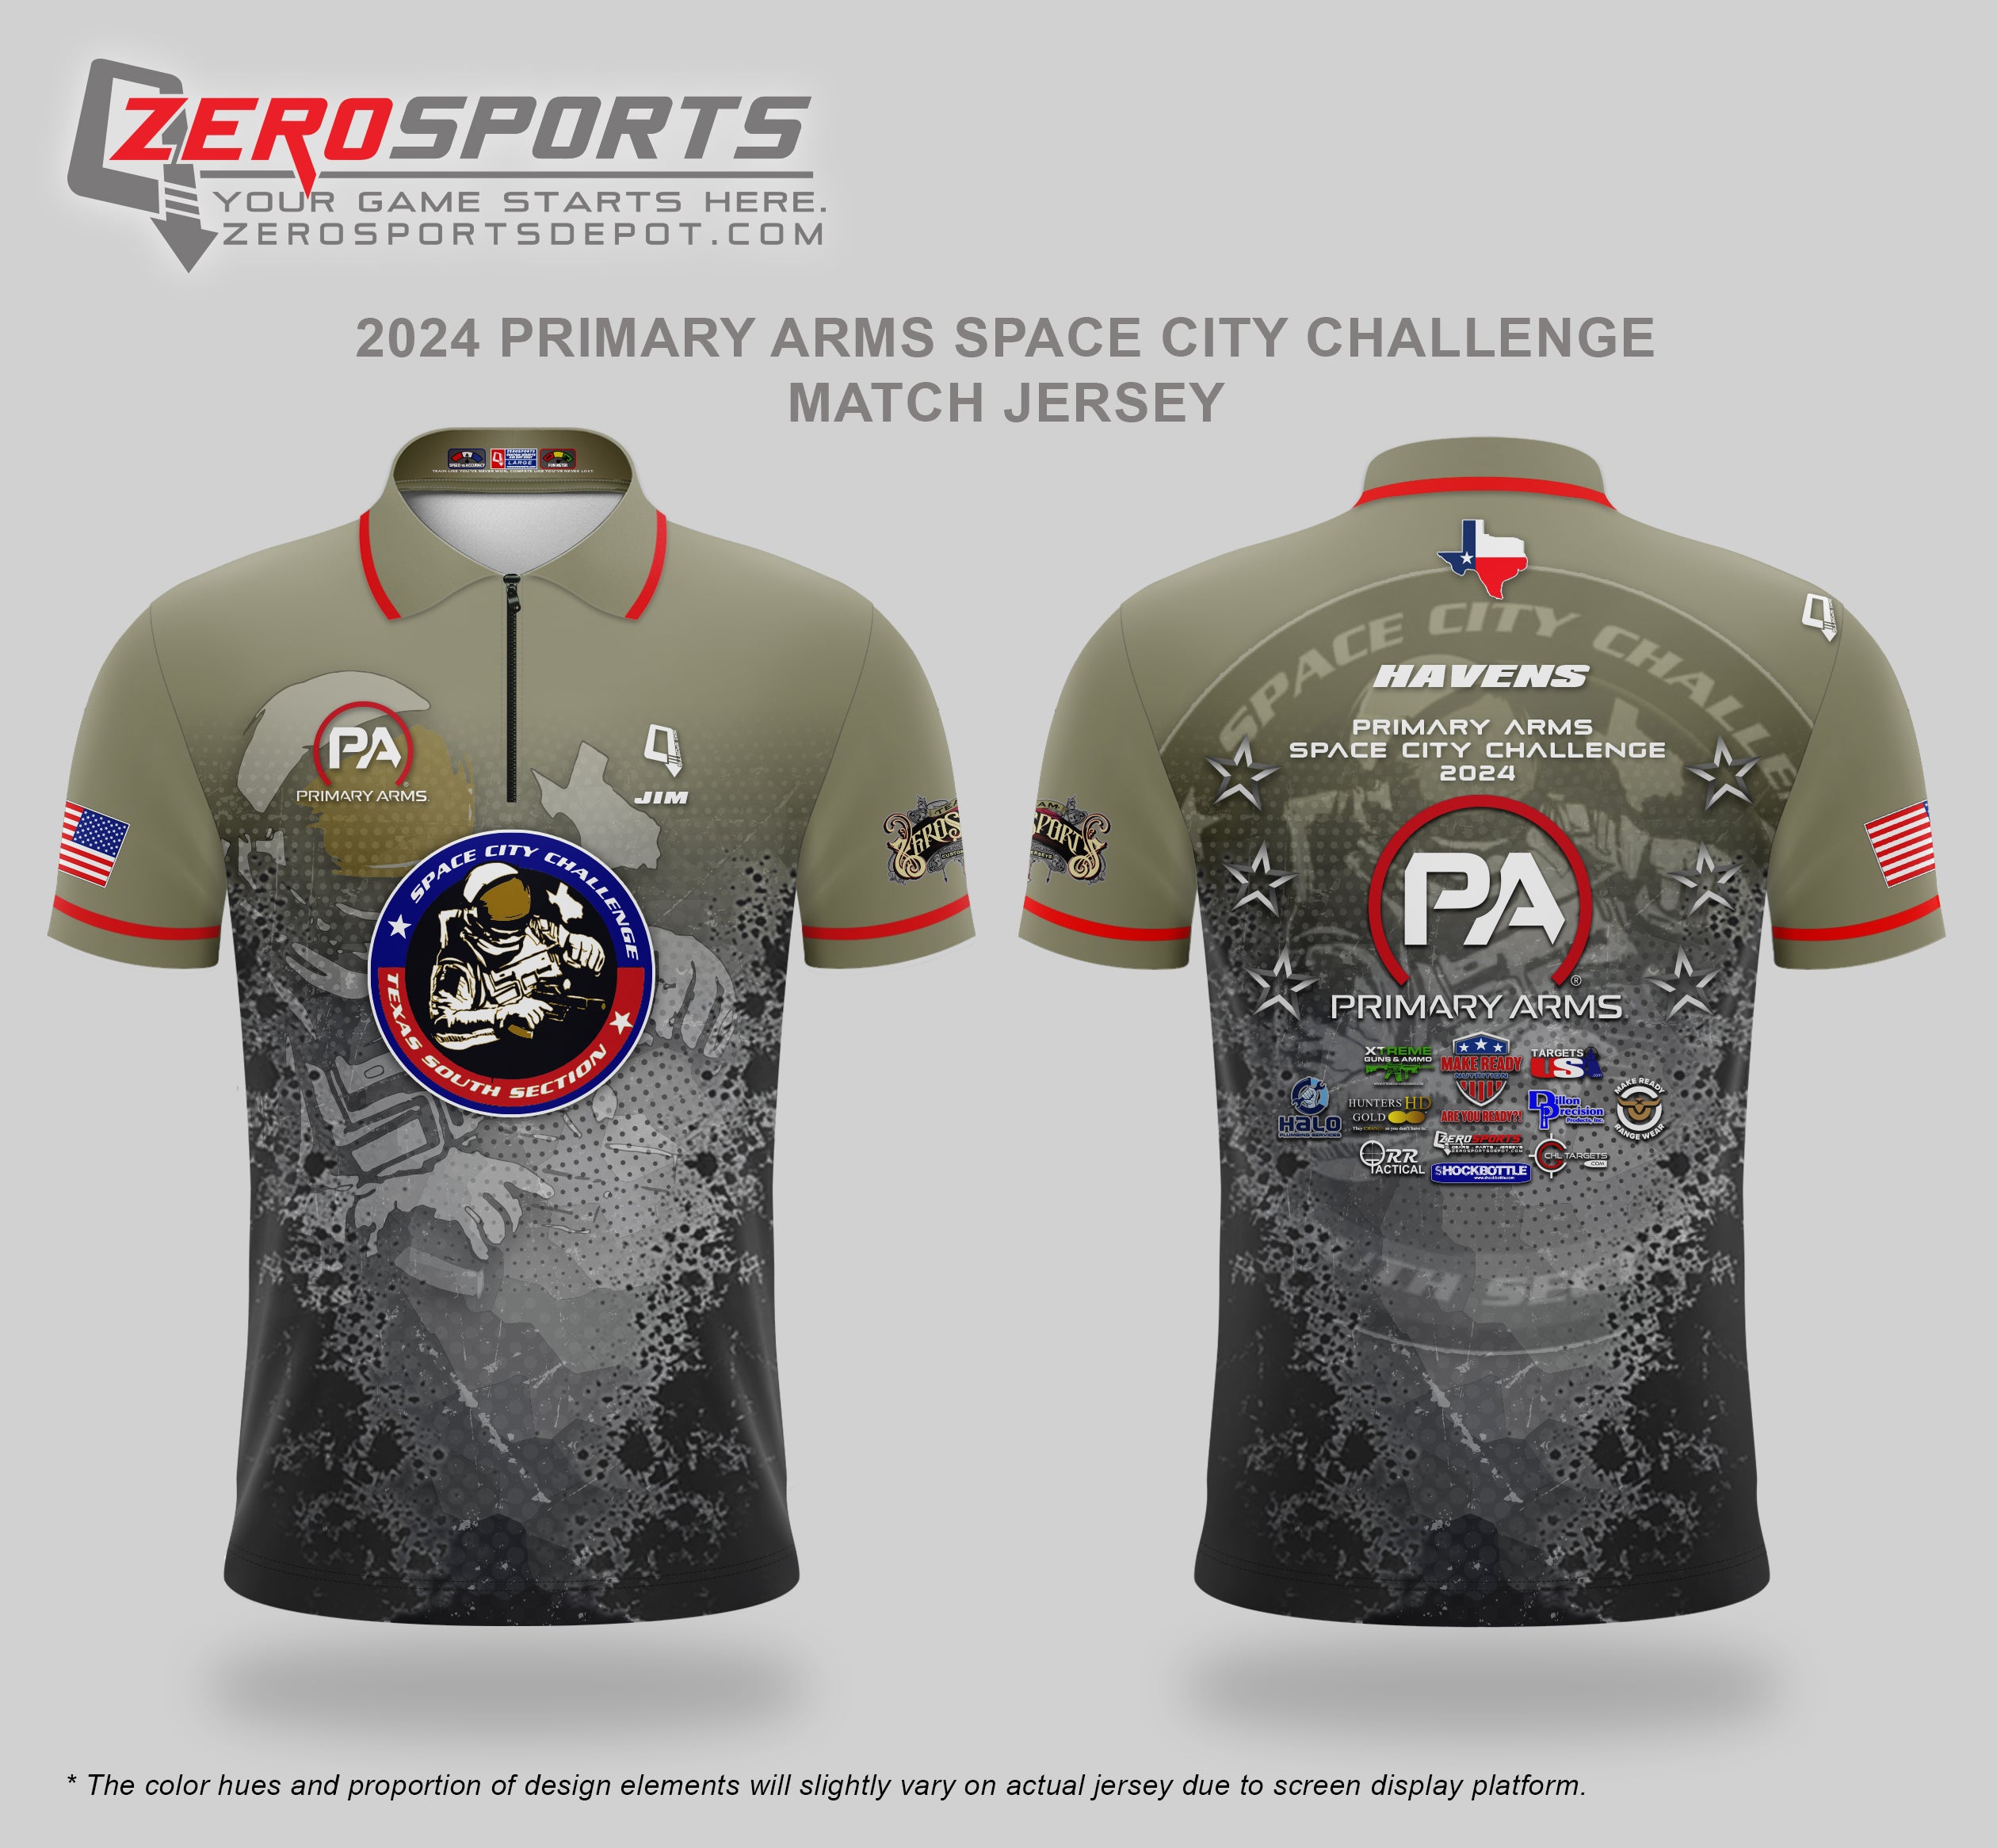 Space City Challenge 2024 Match Jersey. **All orders after 4/22/2024 will be shipped directly to your address after the match.